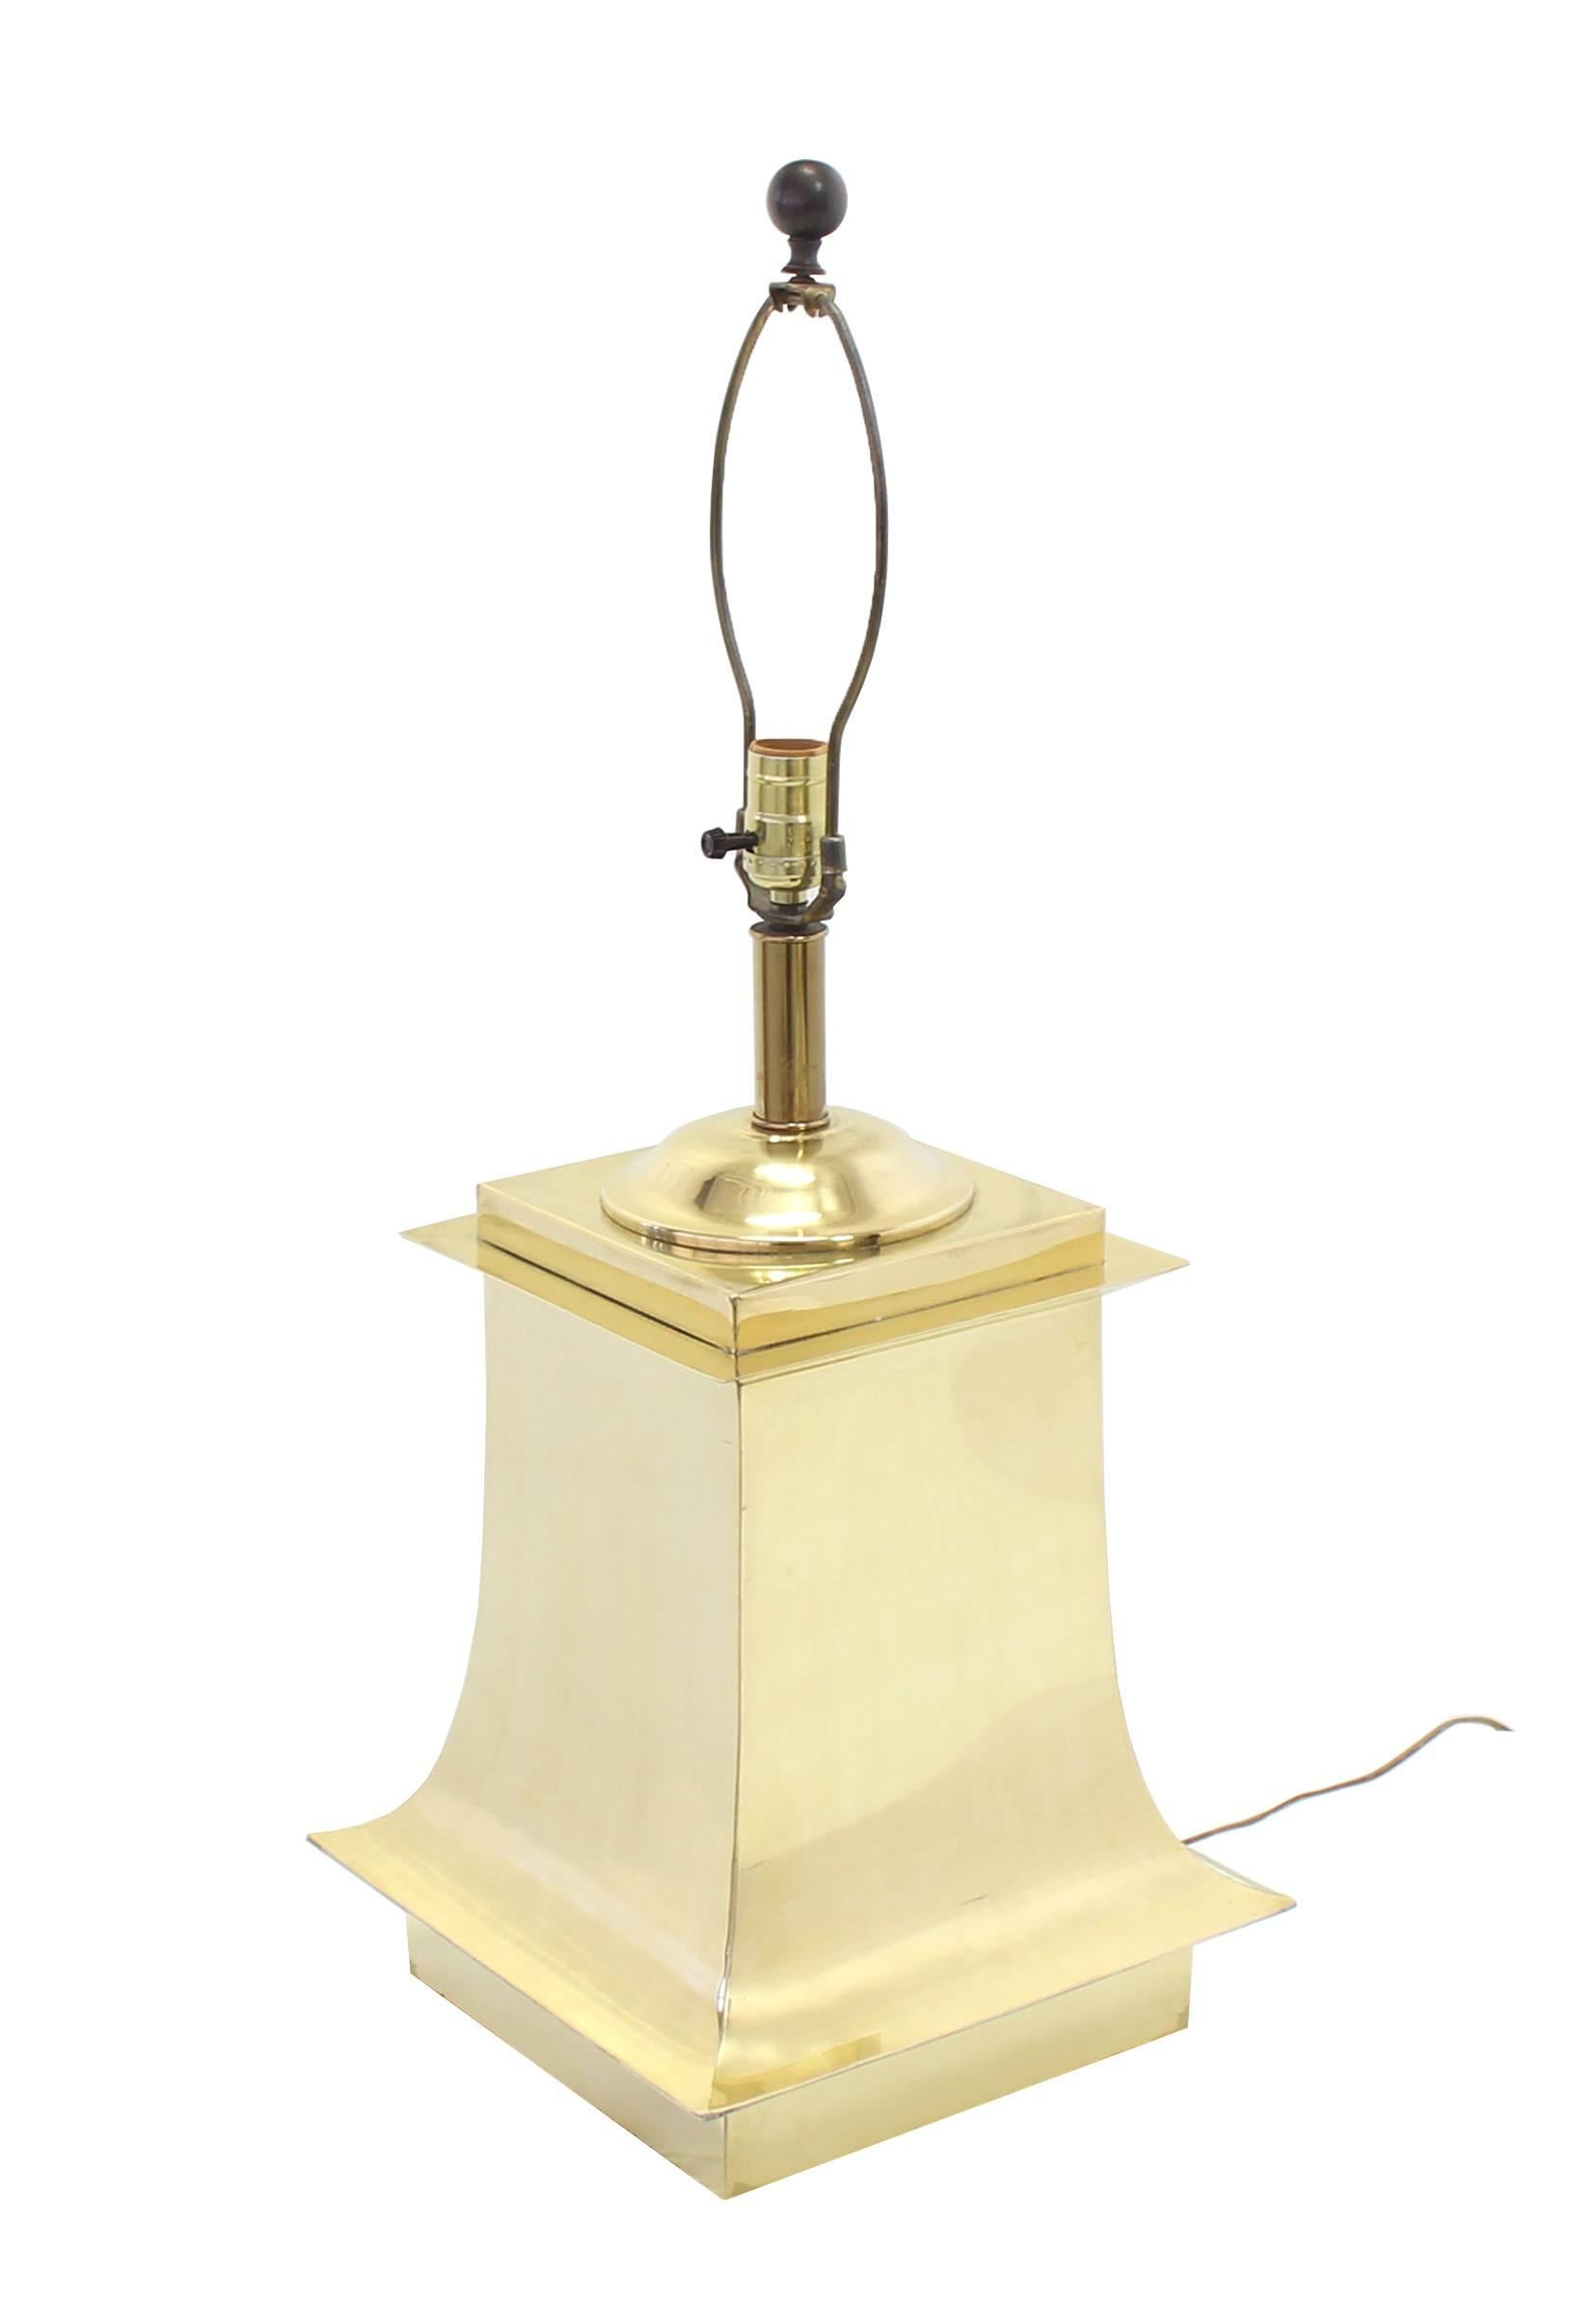 Interactive Brass Beads Shades Square Brass Bases Table Lamps Mid-Century Modern In Excellent Condition For Sale In Rockaway, NJ